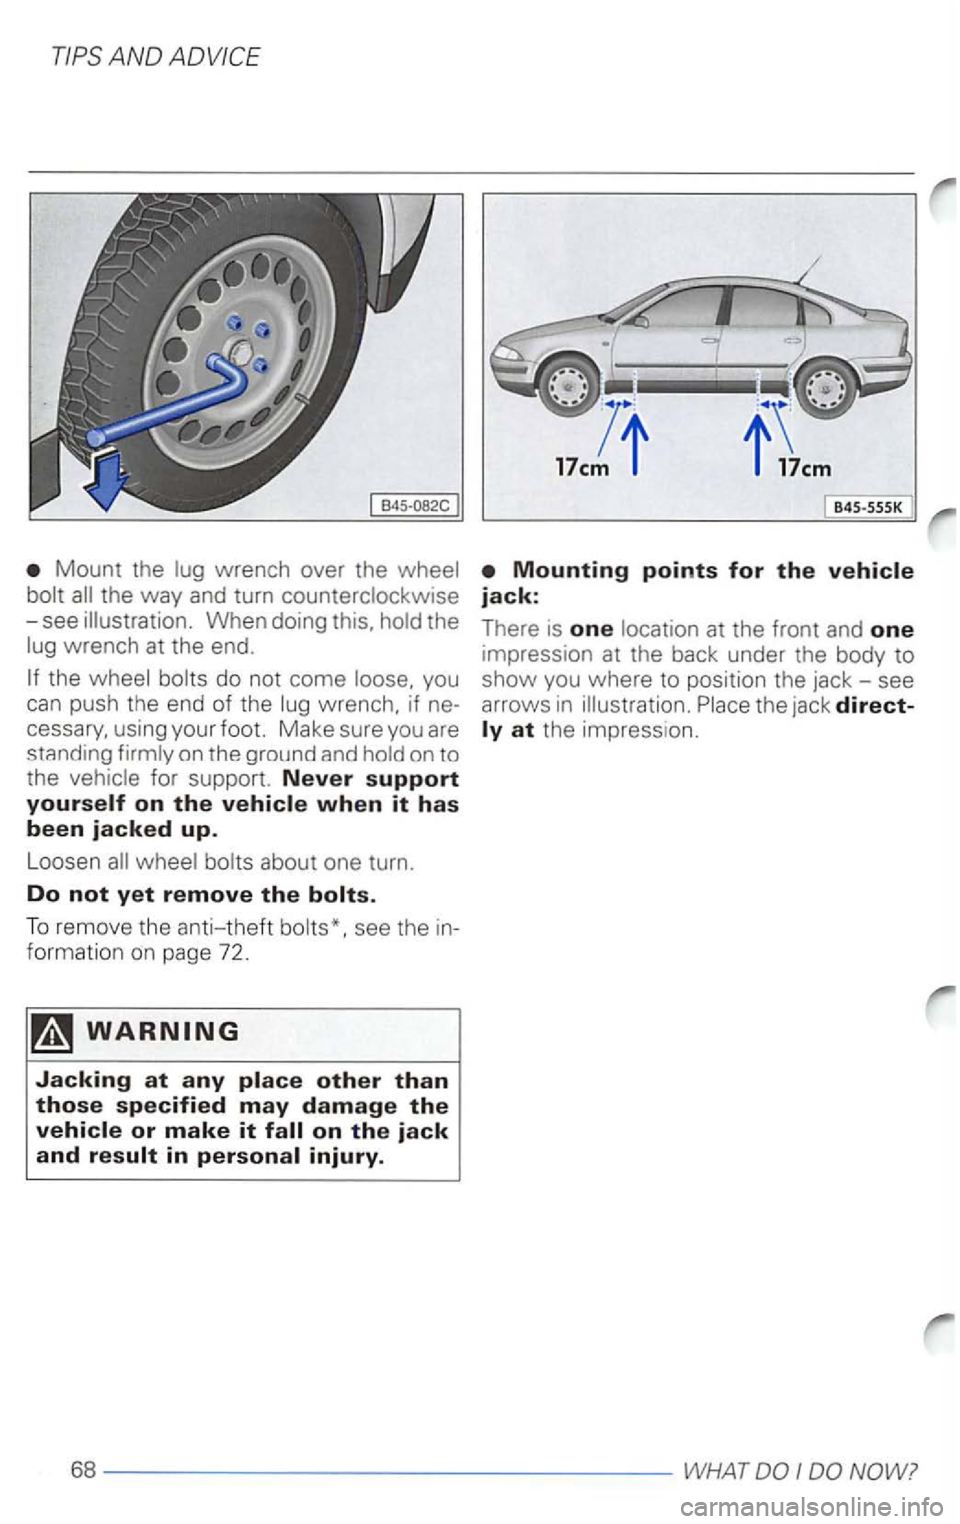 VOLKSWAGEN PASSAT 2003  Owners Manual Mount the lug wrench  over the wheel 
bolt 
whee l bolts  about  one turn. 
Do not yet remove the 
To  rem ove  the  an ti-theft bo lts*.  see th e  in ­
f ormatio n on  page  72. 
845 -SSSK 
Mountin